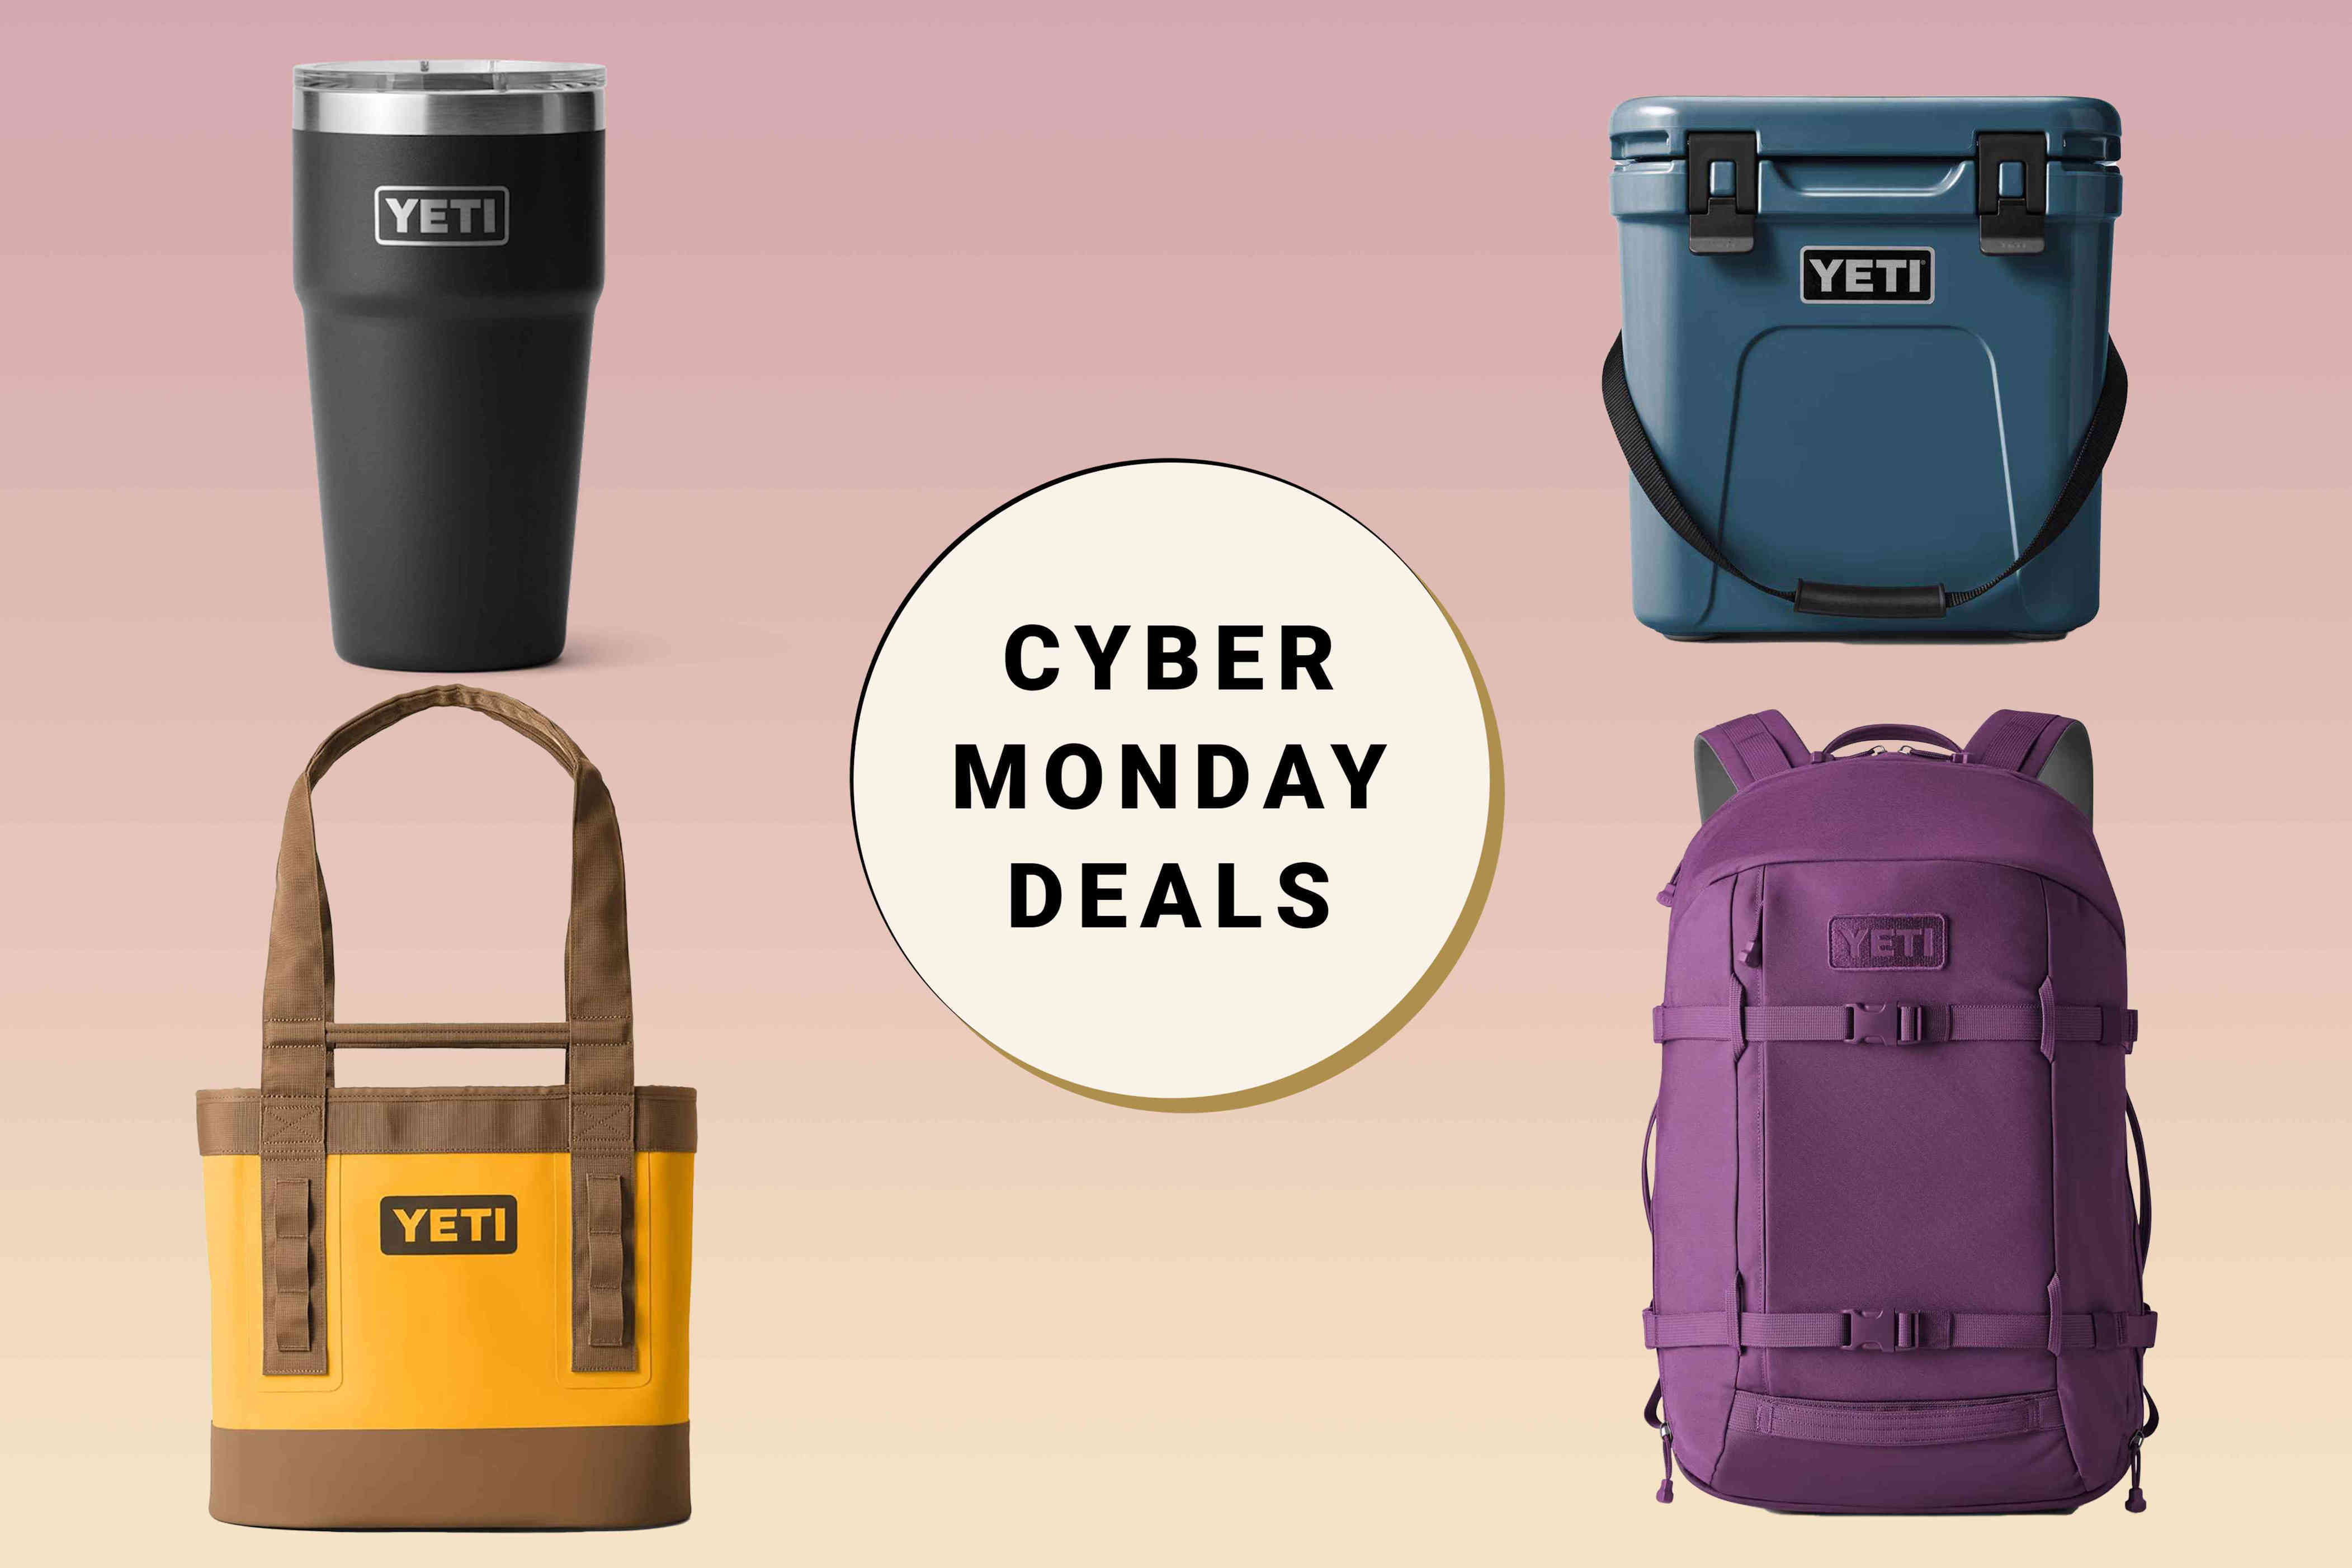 Yeti Cyber Monday Sales Are Rare — but We Found 12 Deals on Yeti